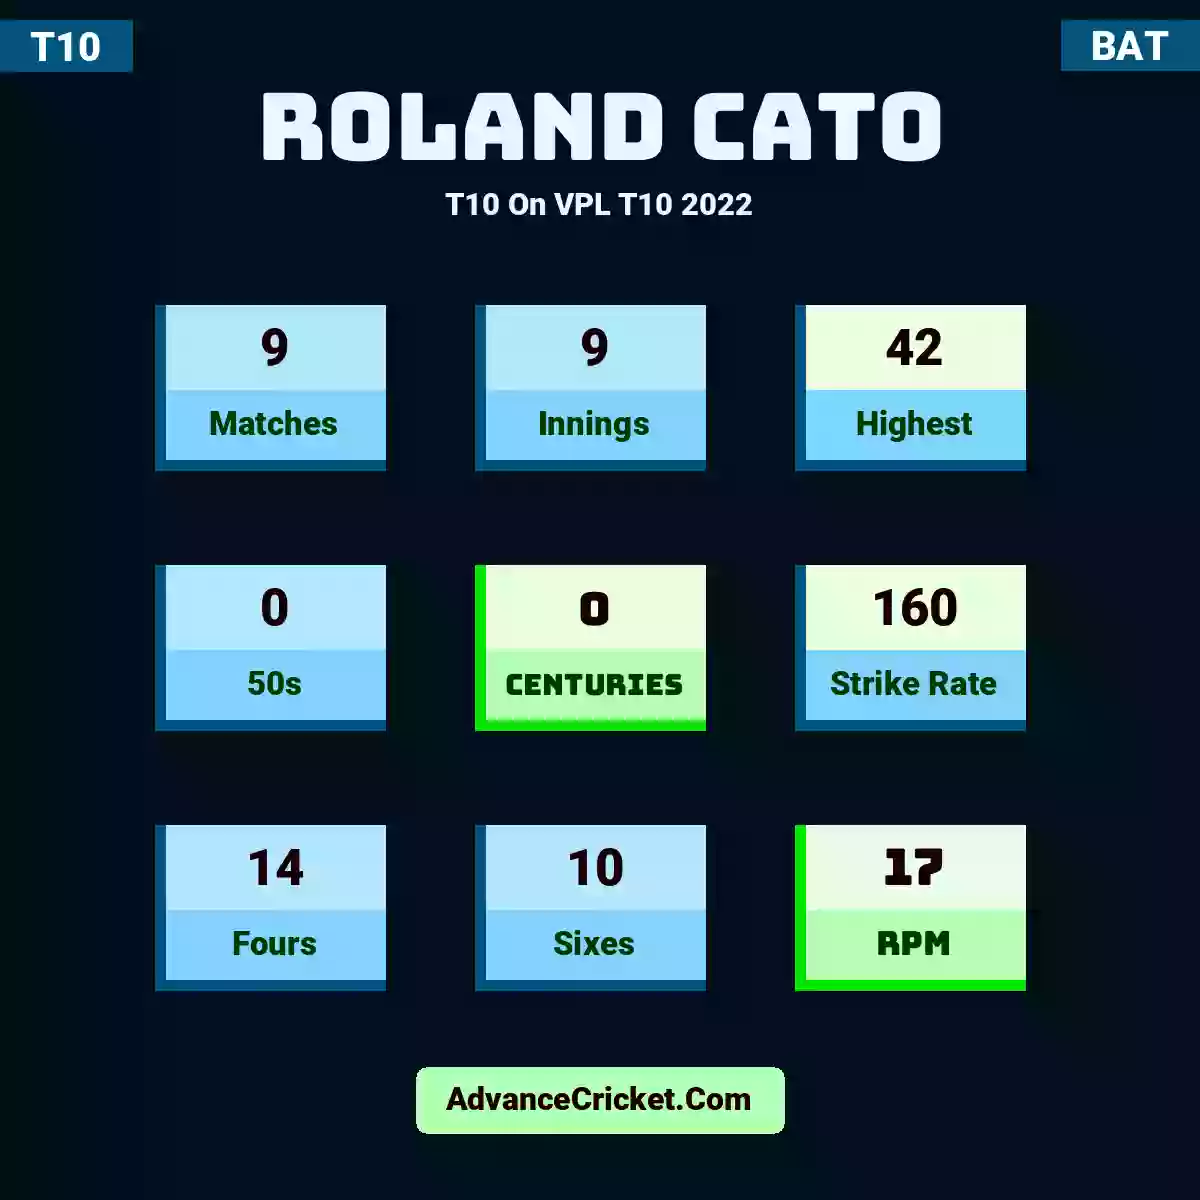 Roland Cato T10  On VPL T10 2022, Roland Cato played 9 matches, scored 42 runs as highest, 0 half-centuries, and 0 centuries, with a strike rate of 160. R.Cato hit 14 fours and 10 sixes, with an RPM of 17.